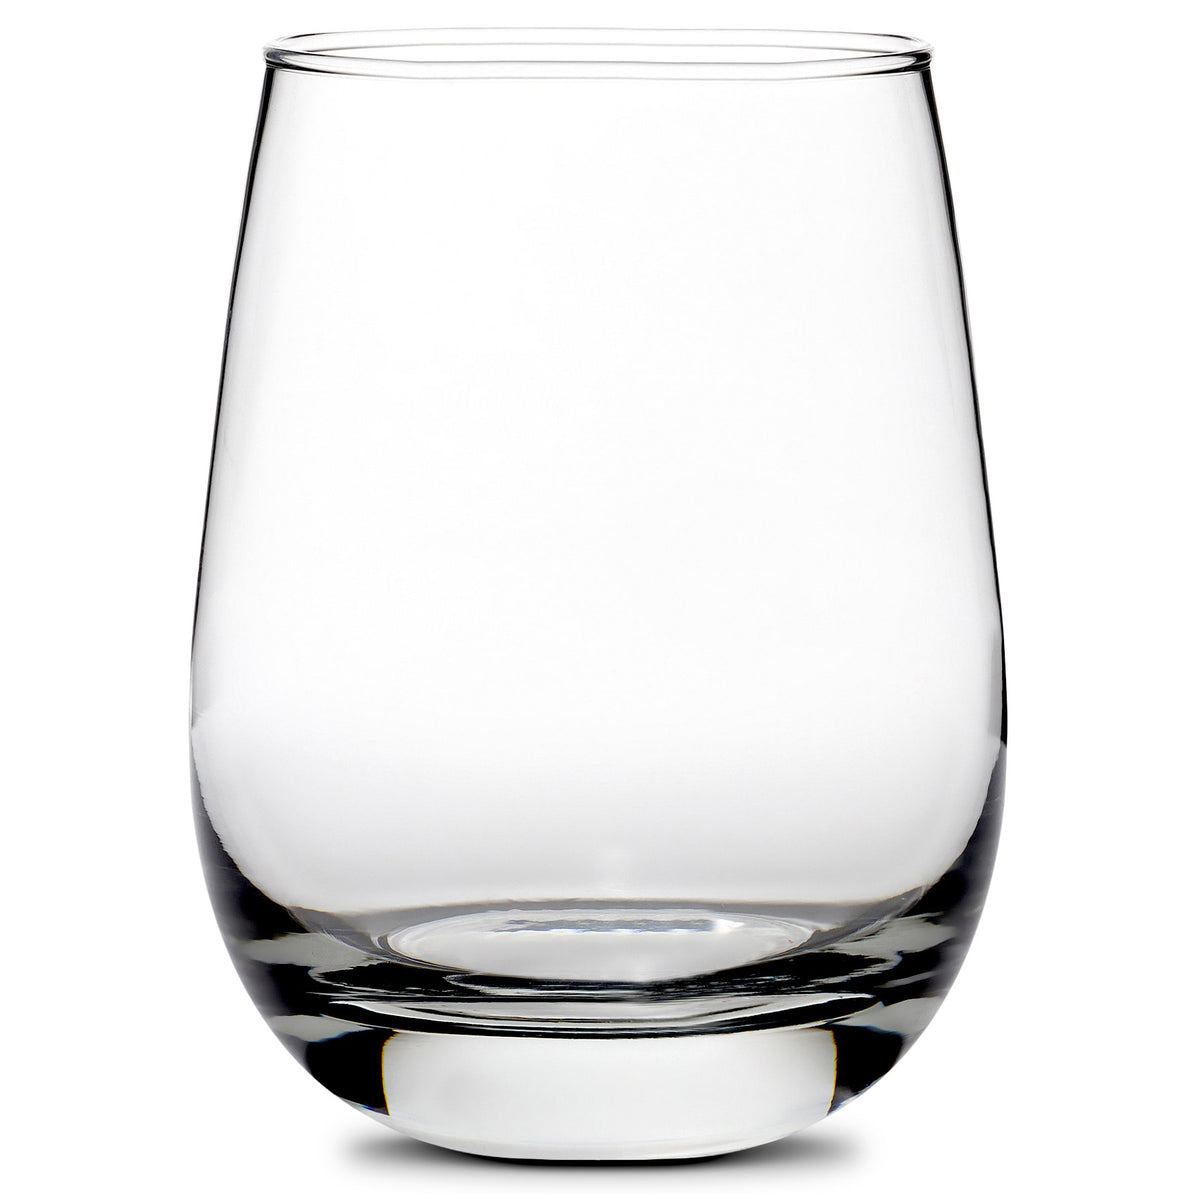 Etched Stemless Wine Glass with your text, logo, or graphics